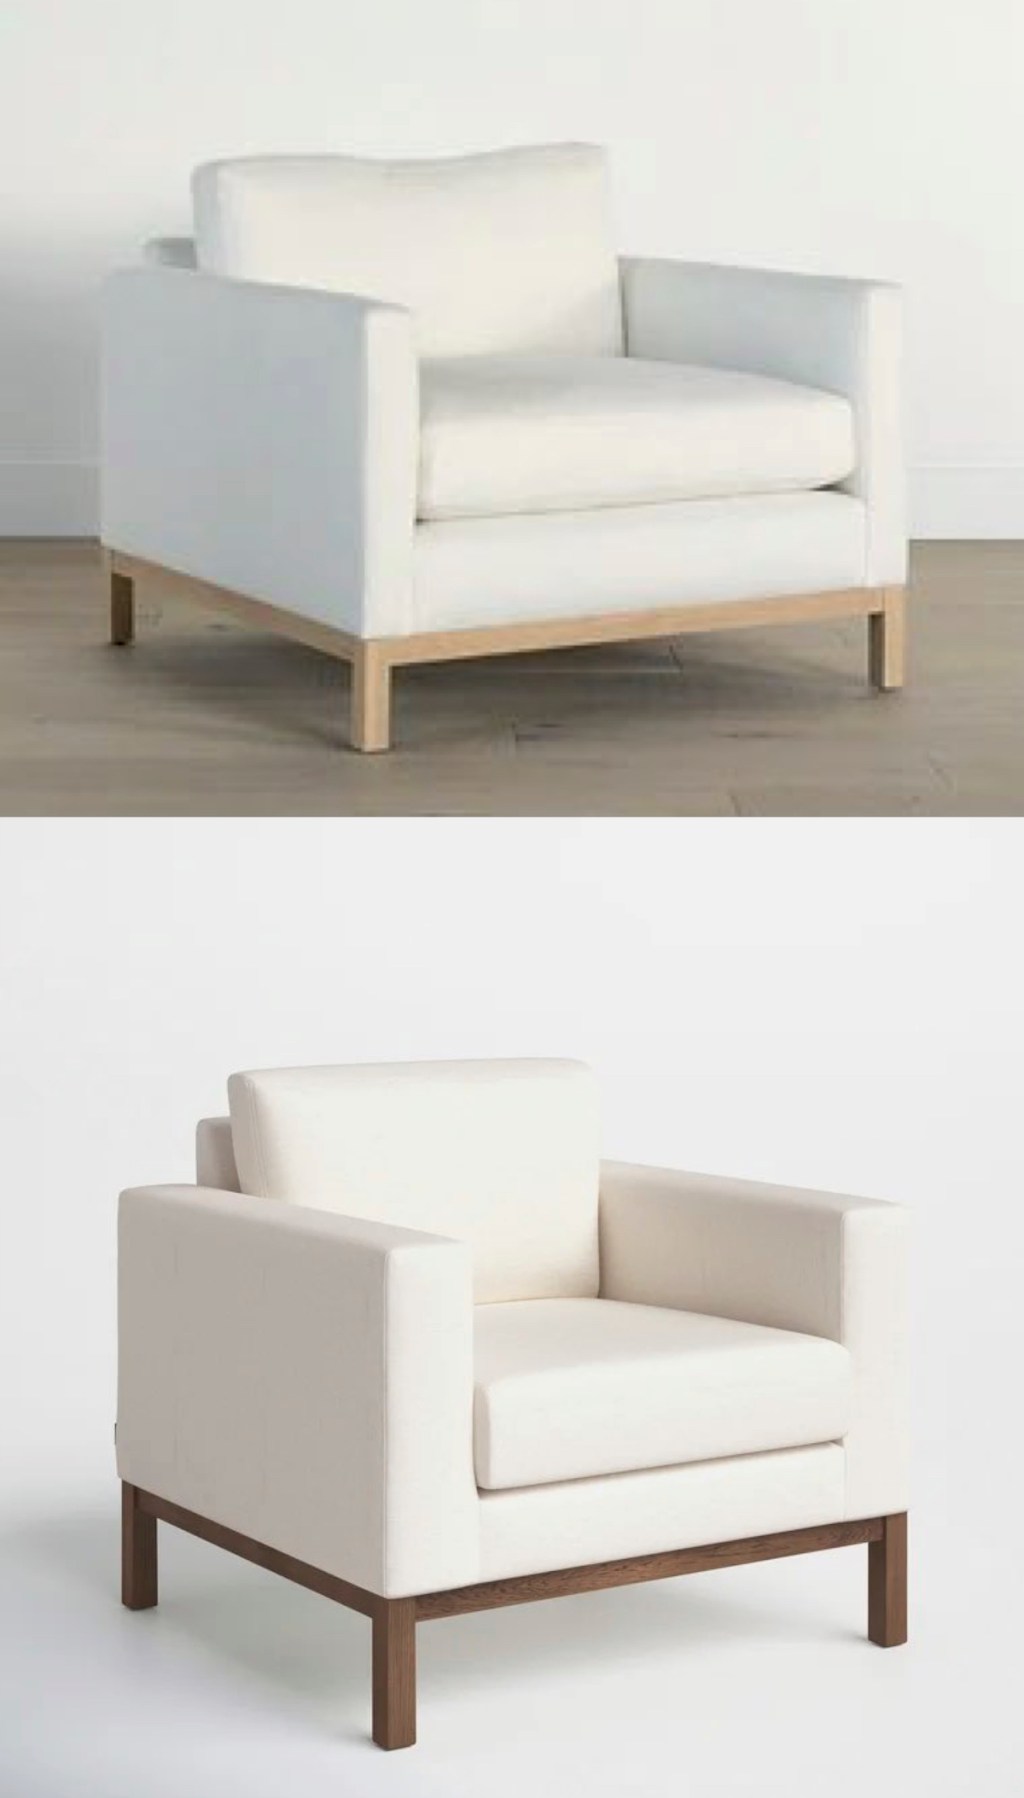 two white accent chairs on stock photo backgrounds